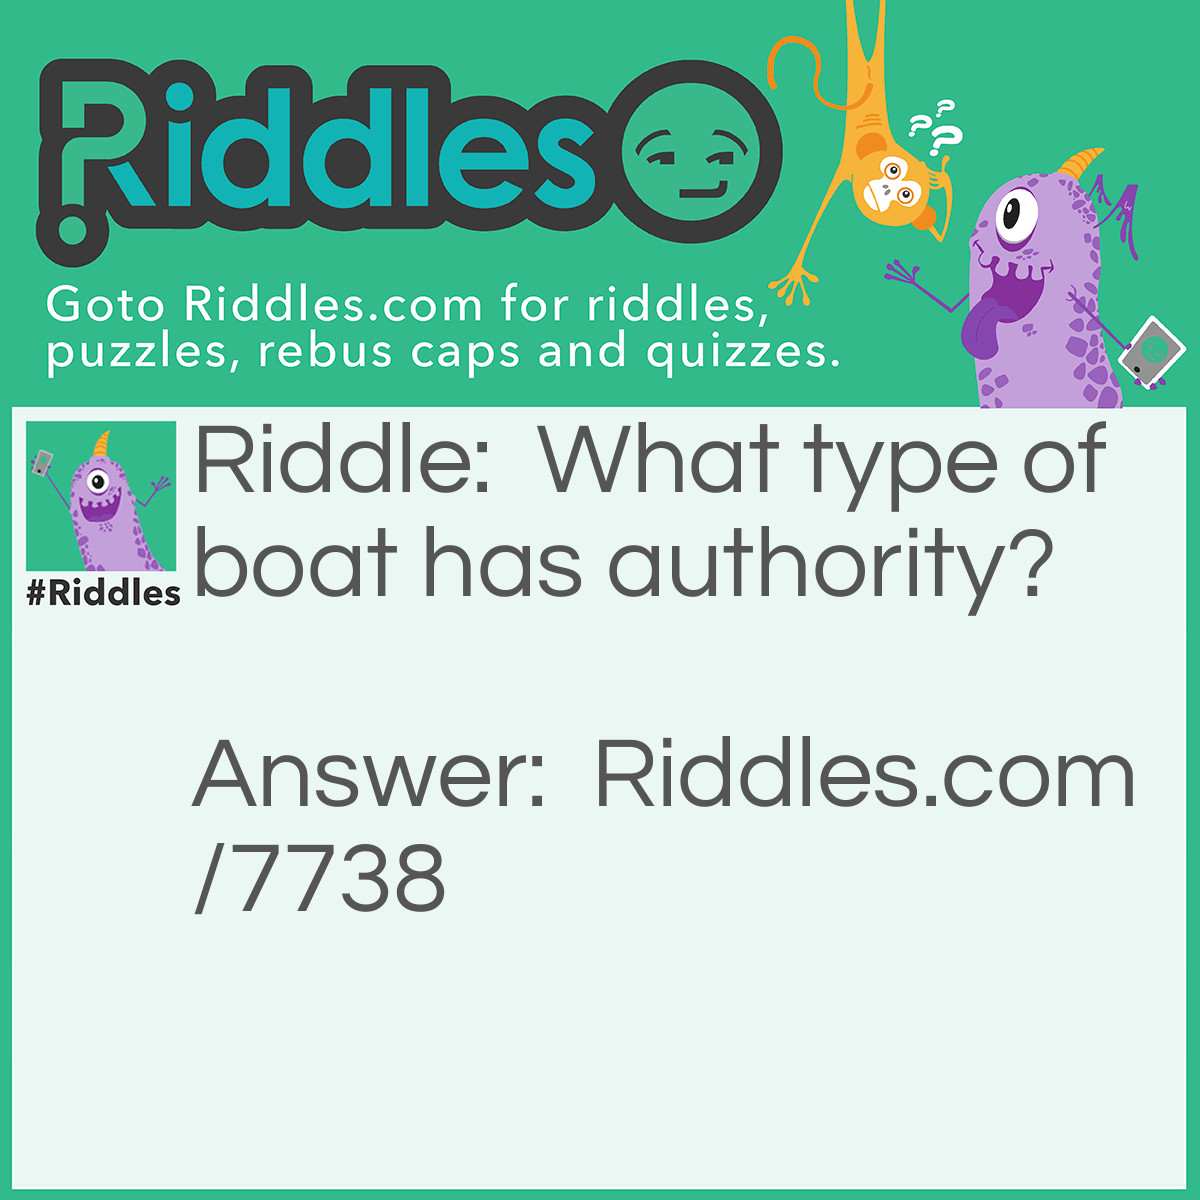 Riddle: What type of boat has authority? Answer: Ownership!